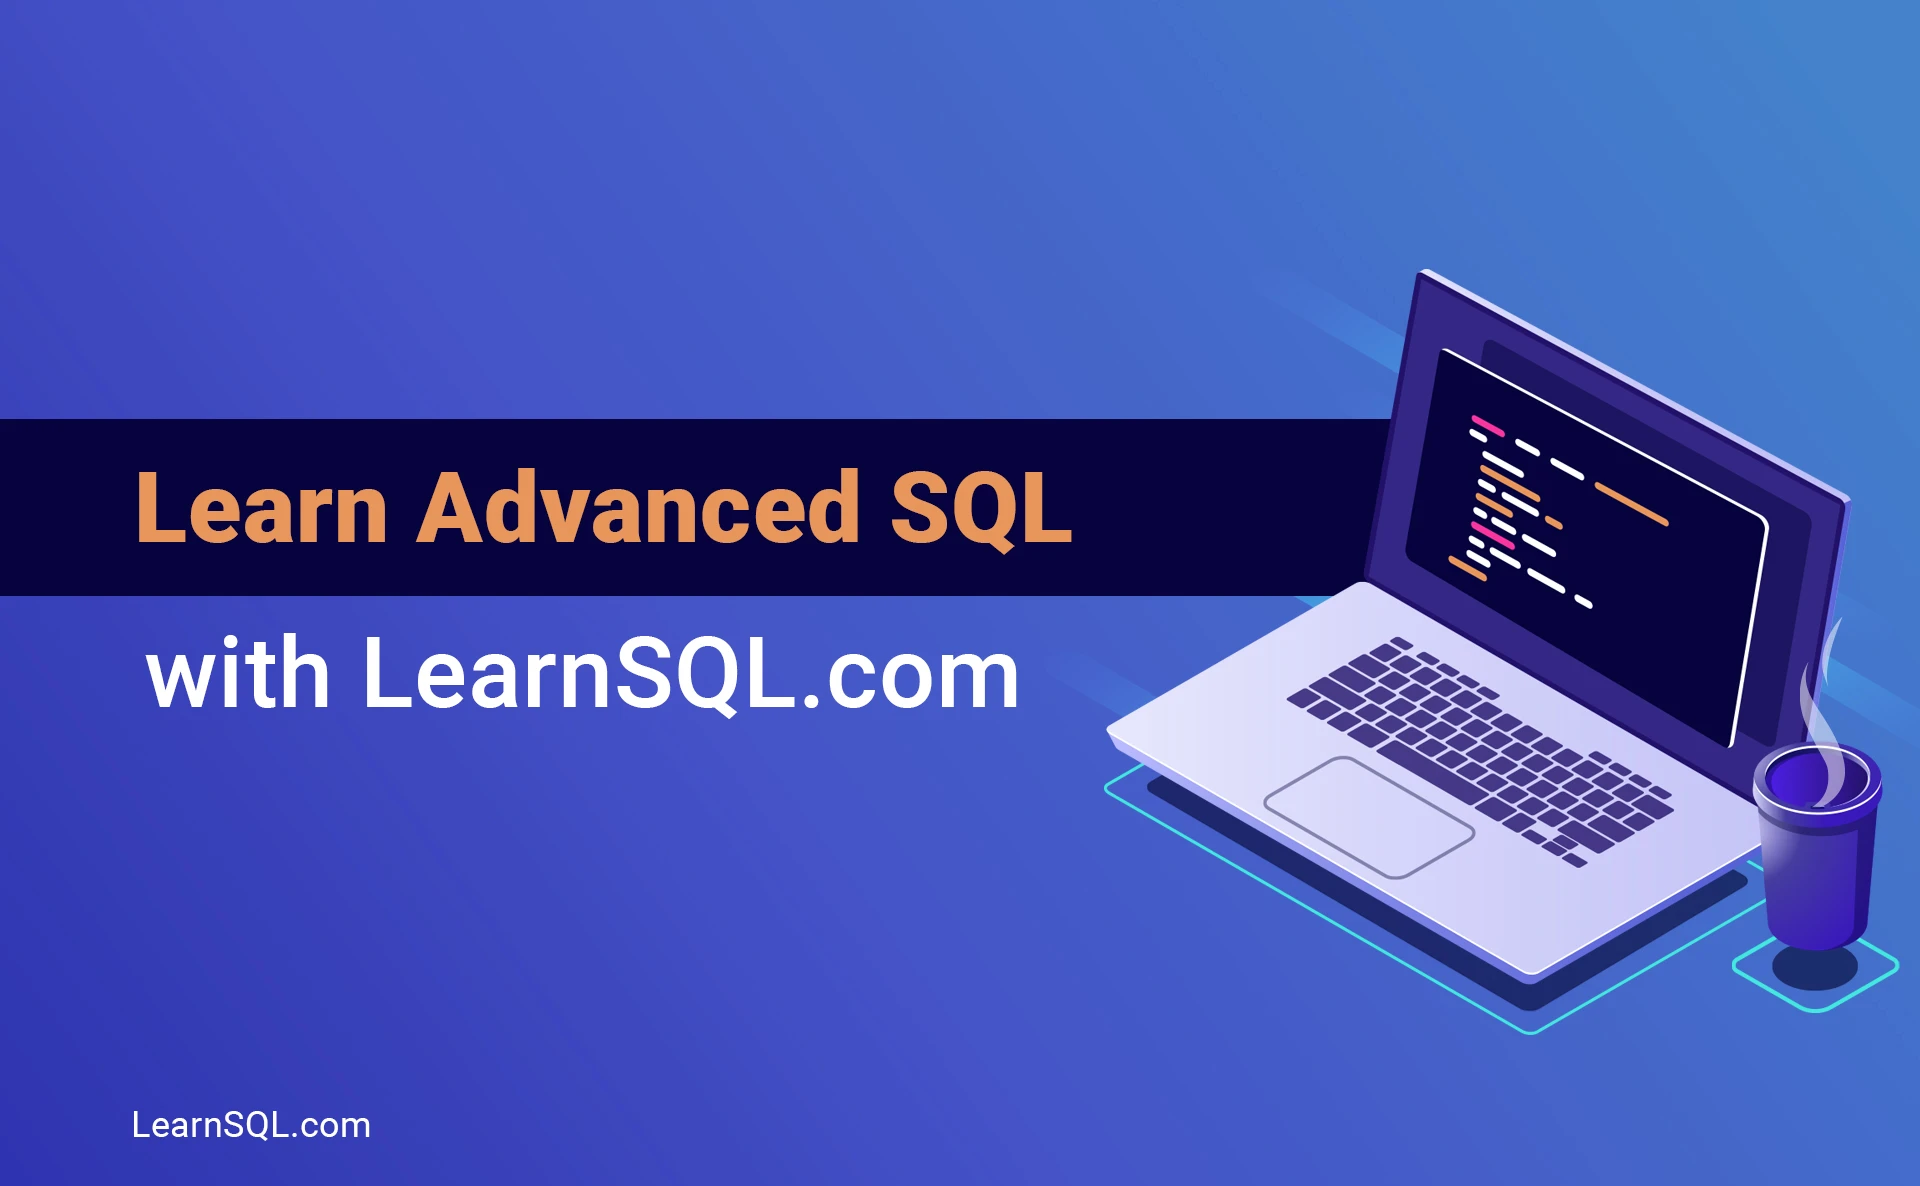 Learn Advanced SQL with LearnSQL.com